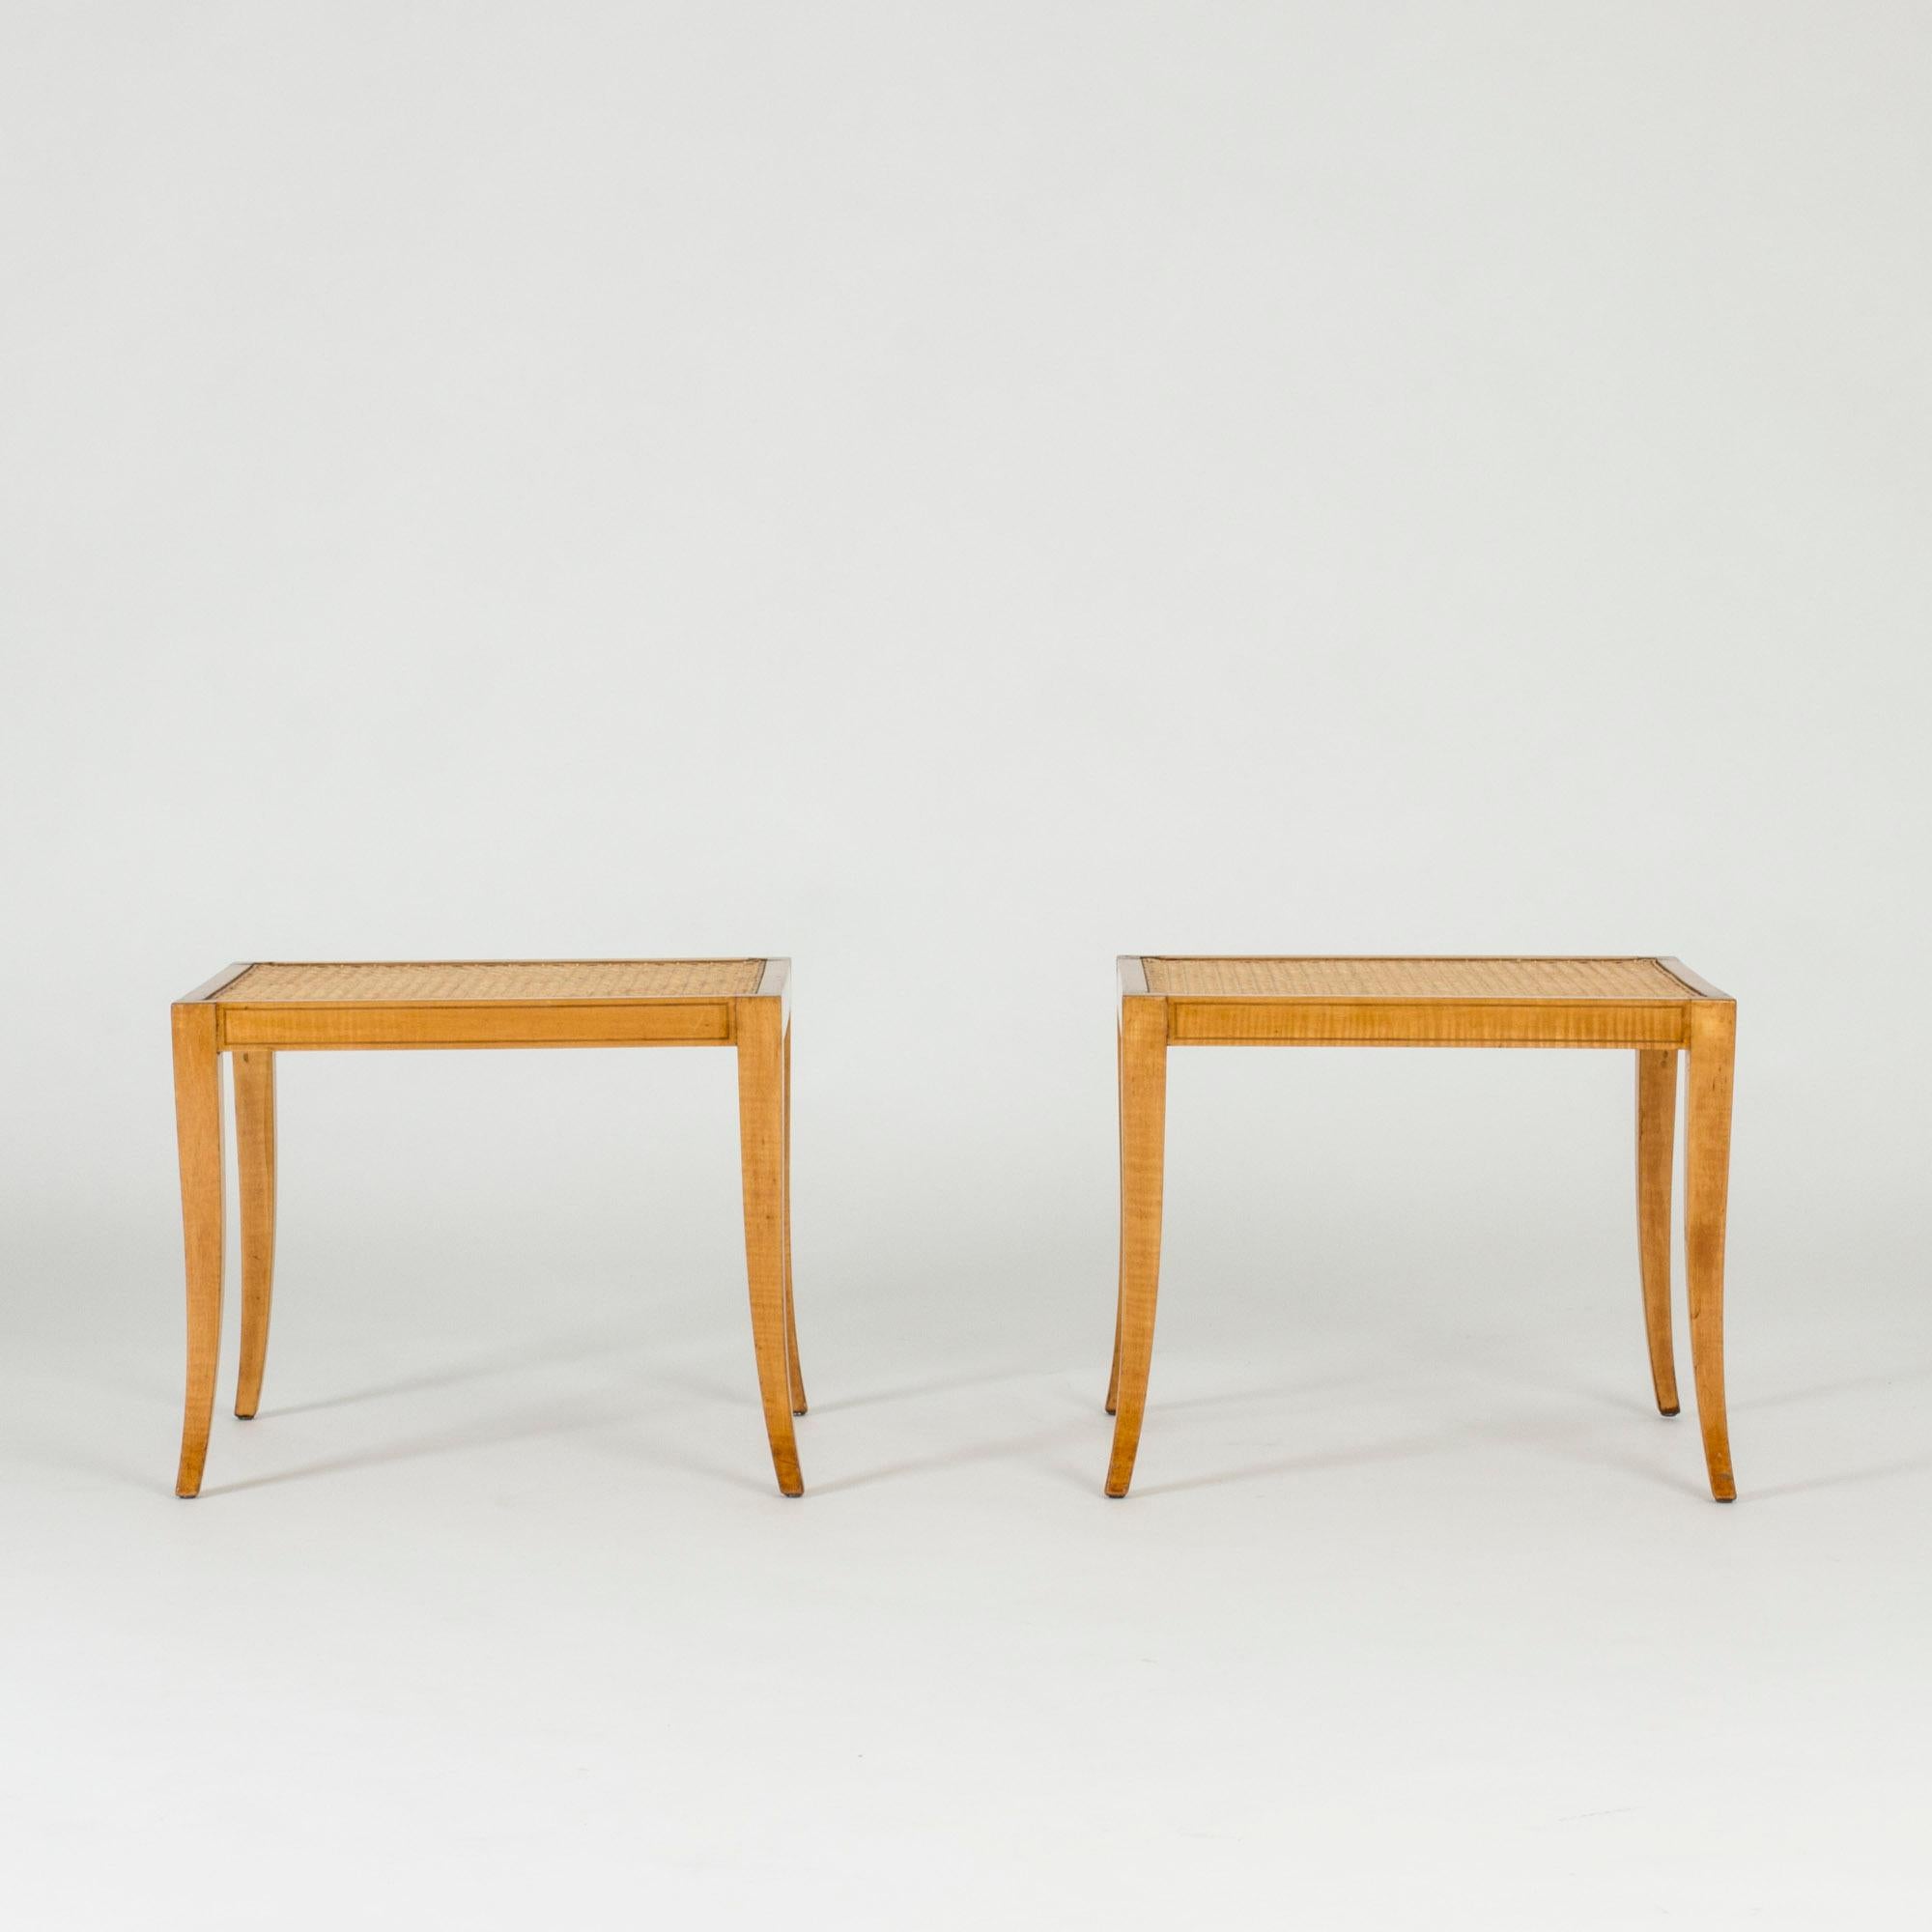 Pair of beautiful stools by Frits Henningsen, made from mahogany with rattan seats. Beautiful light design with curved legs.